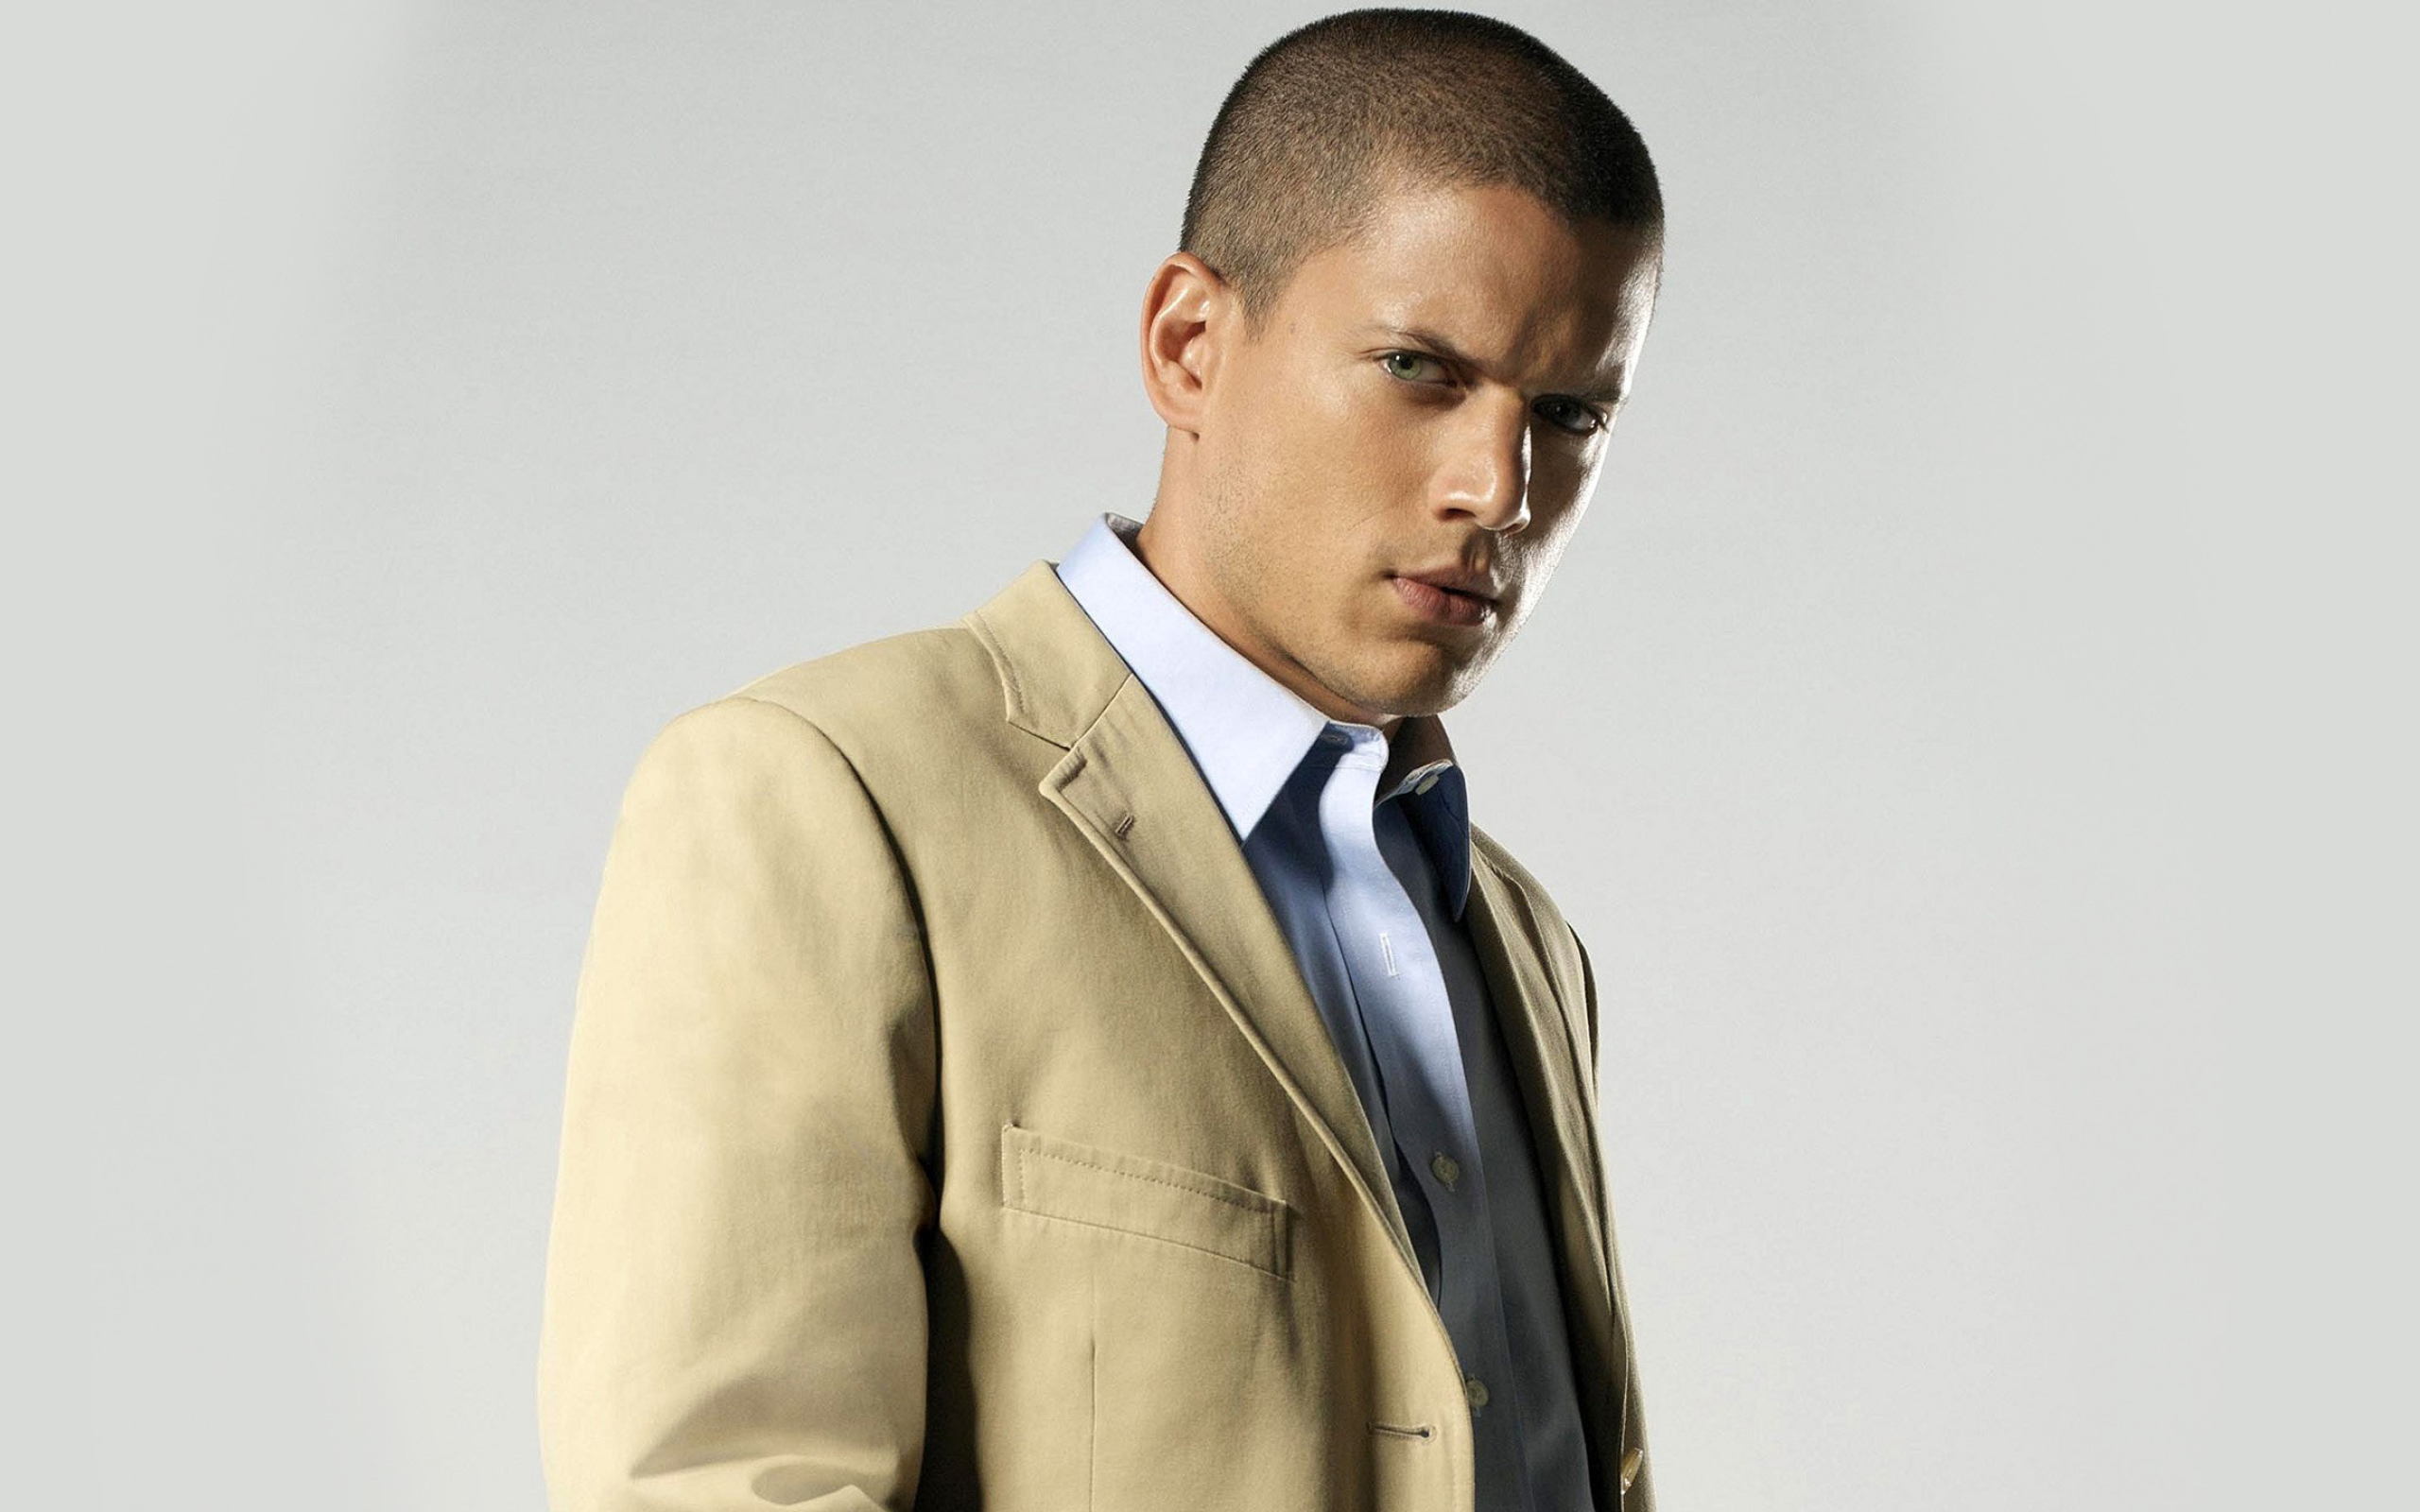 Wentworth Miller, Male celebrity wallpapers, Pictures, 11594, 2560x1600 HD Desktop